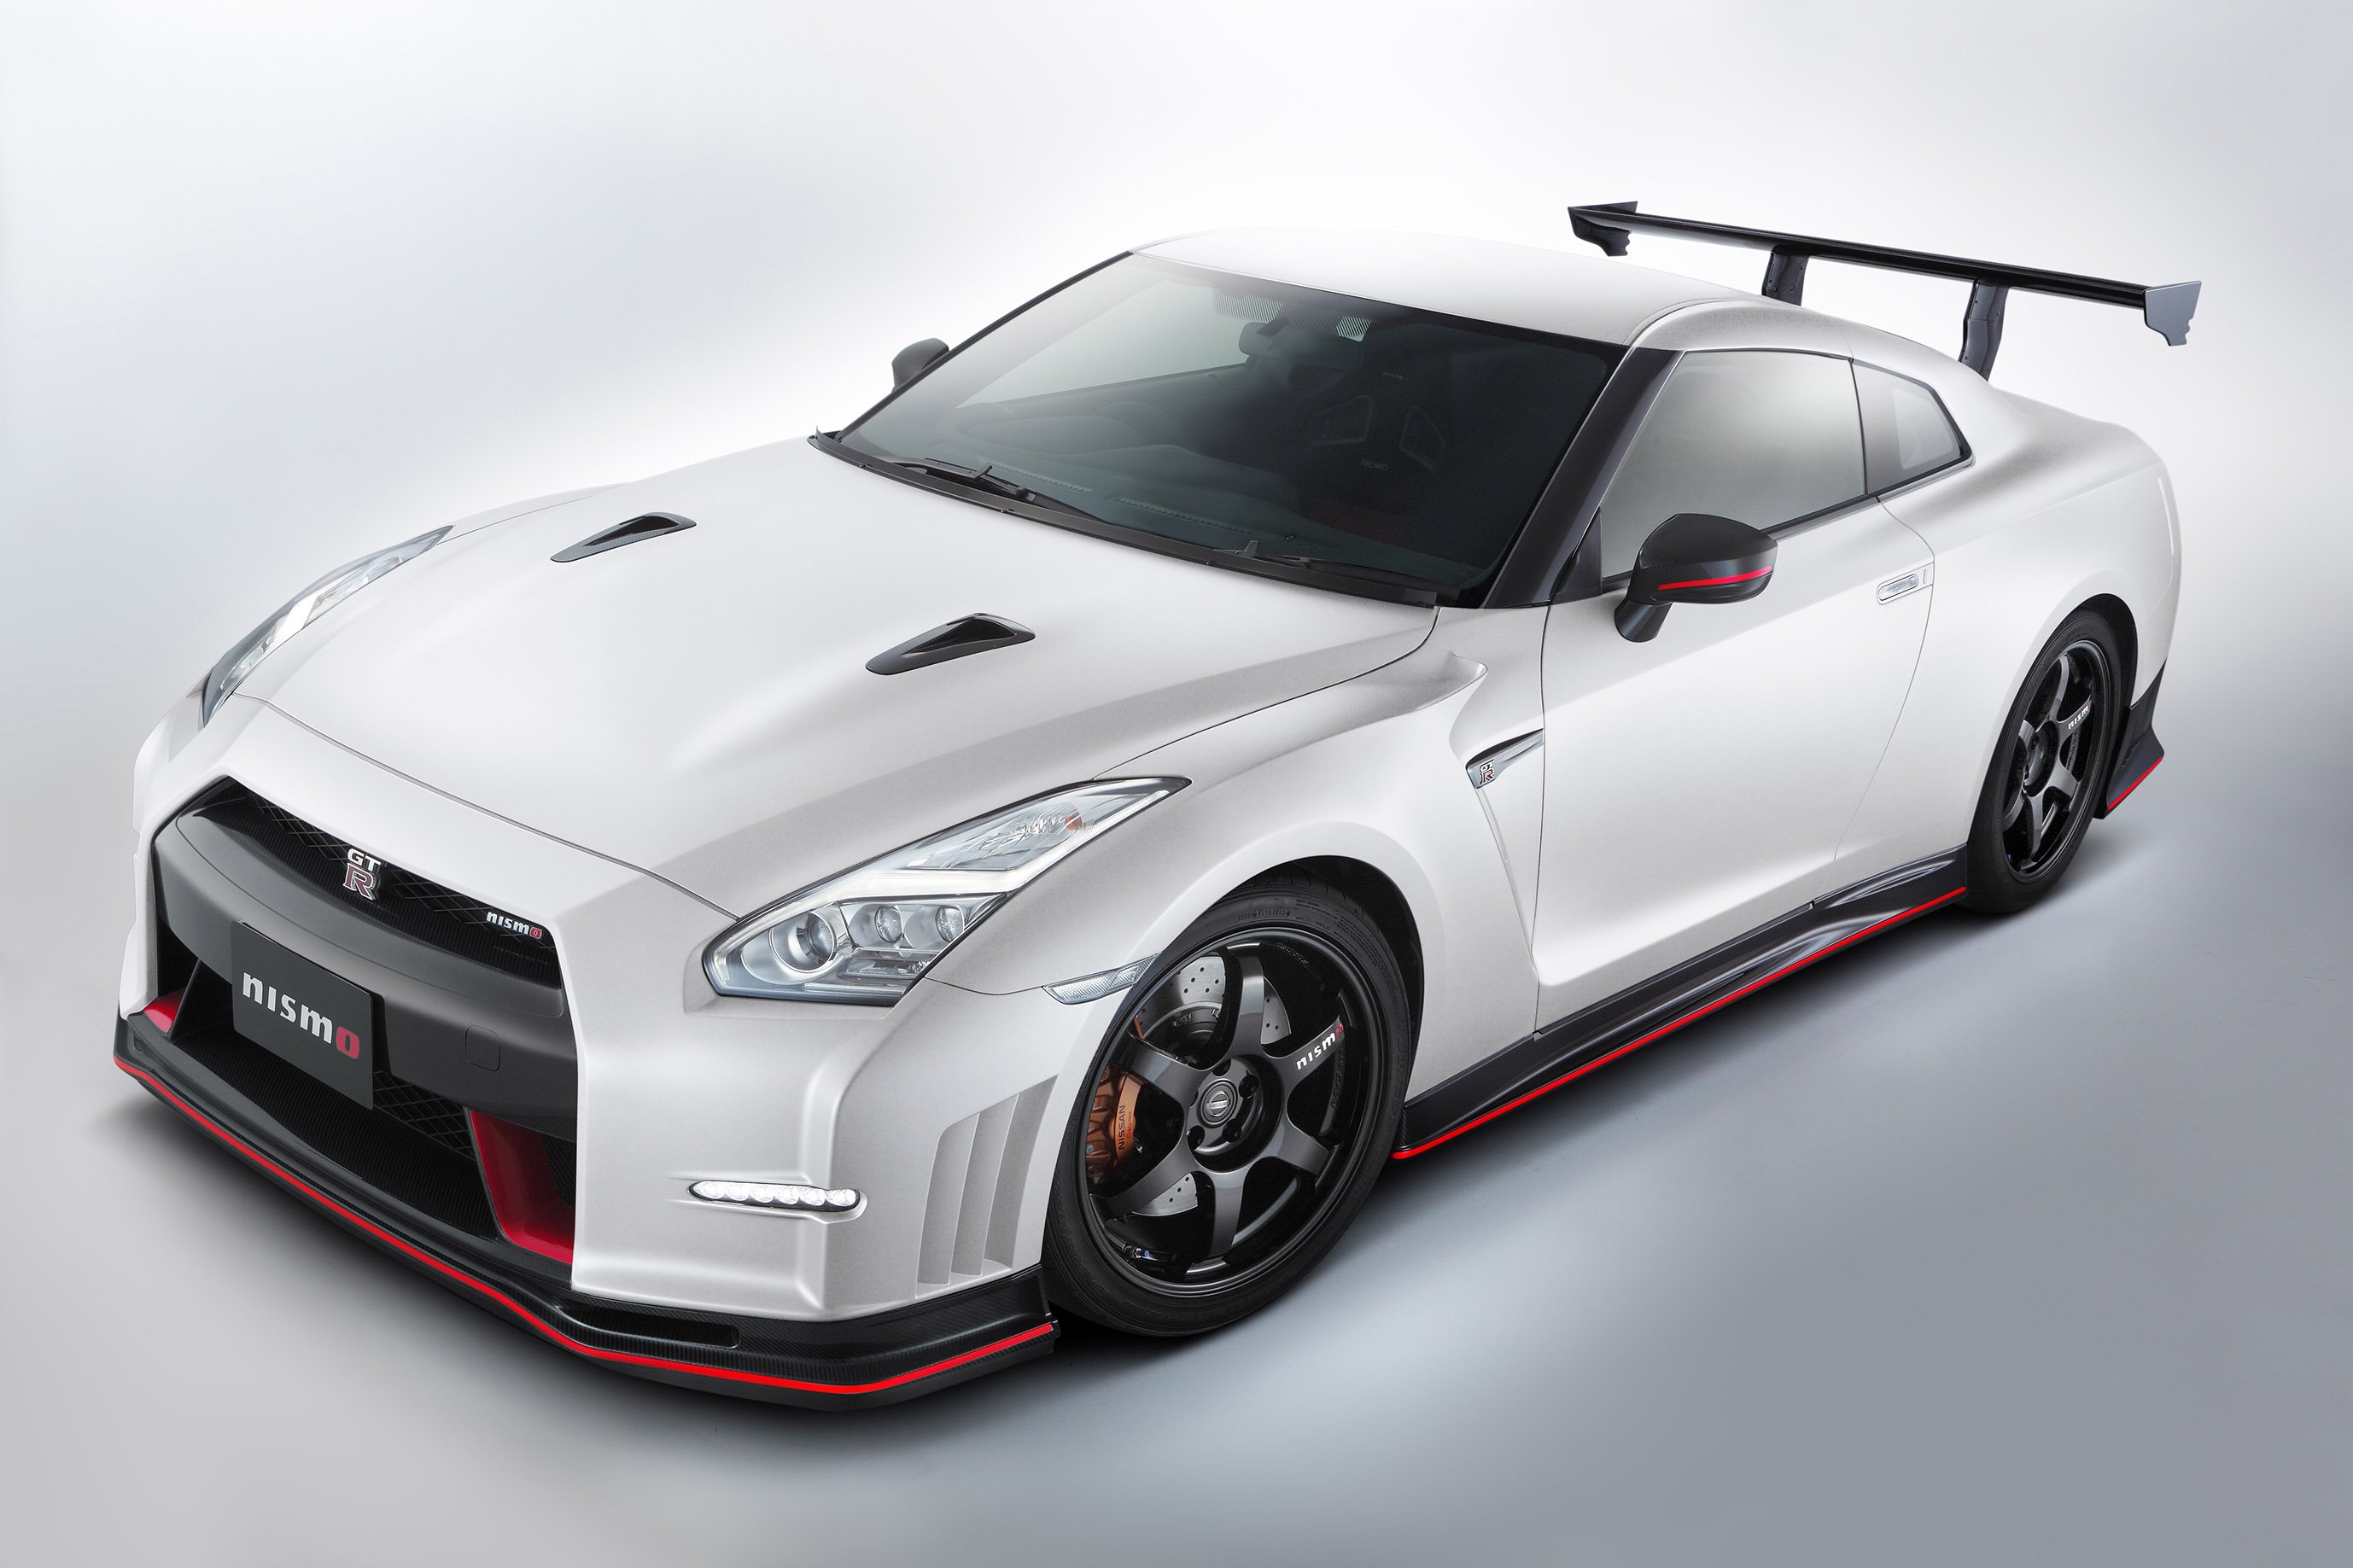 2016, Nissan, Gt r, Nismo, N attack, Package, Cars Wallpaper